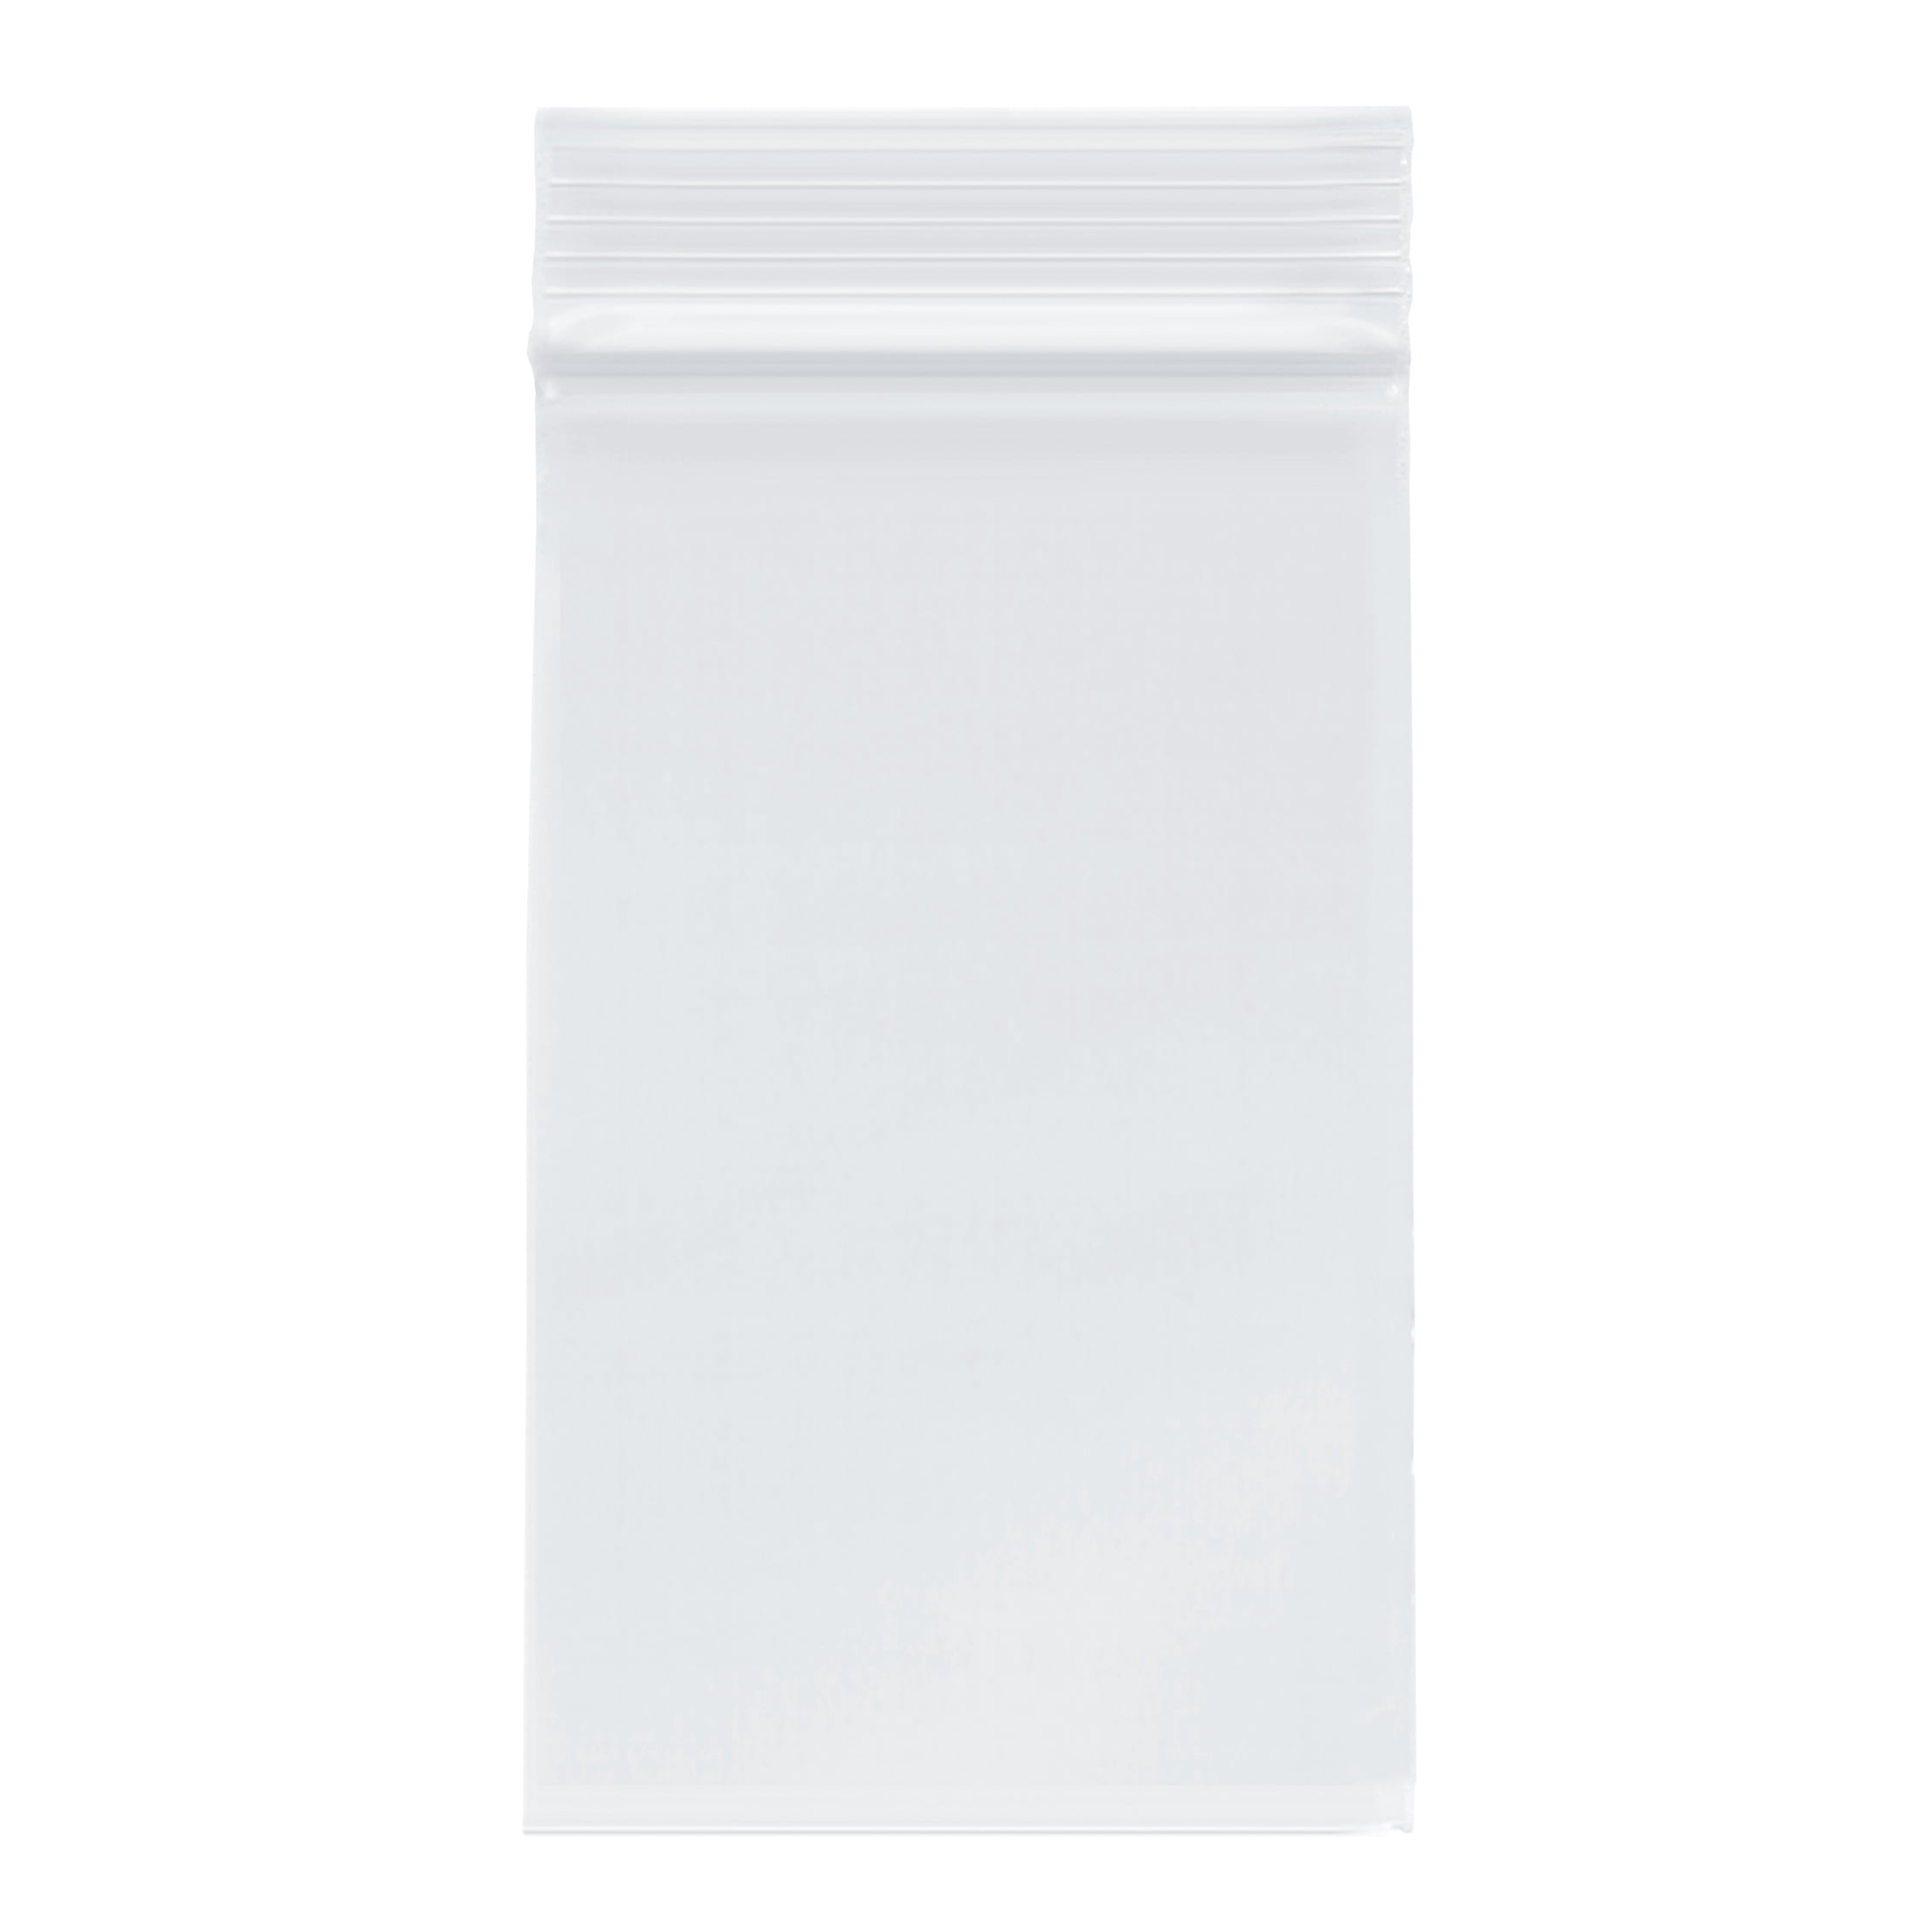 Clear Reclosable Bags 3" x 5" 2 Mil Plastic Polybags with Hang Hole 500 pieces 